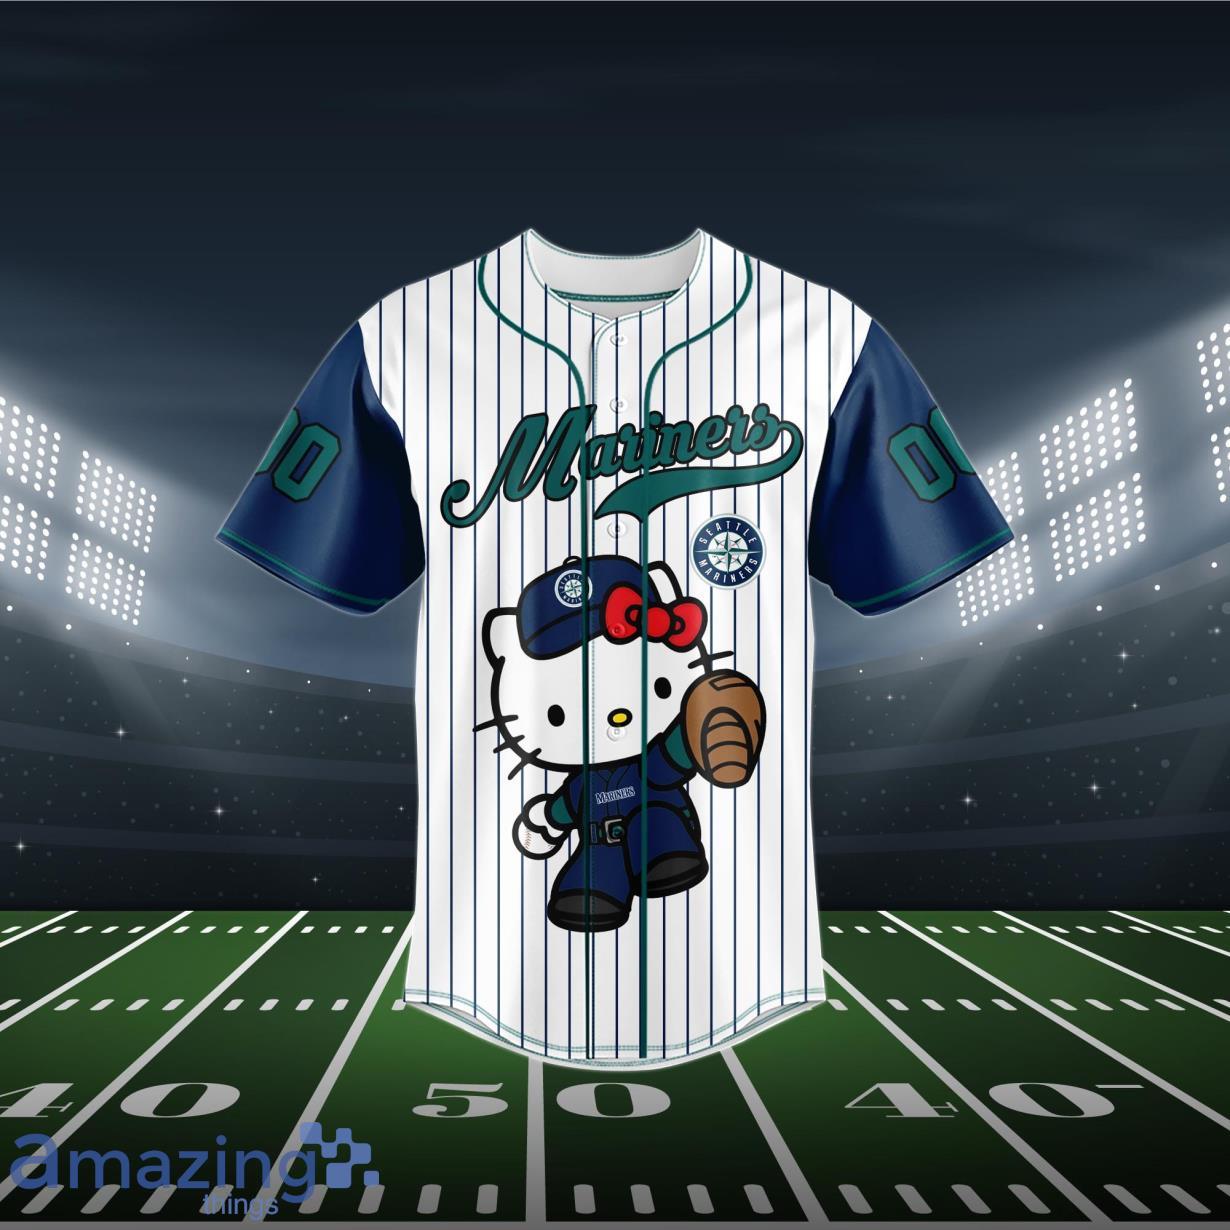 All I want for Christmas is the Mariners to get new home jerseys